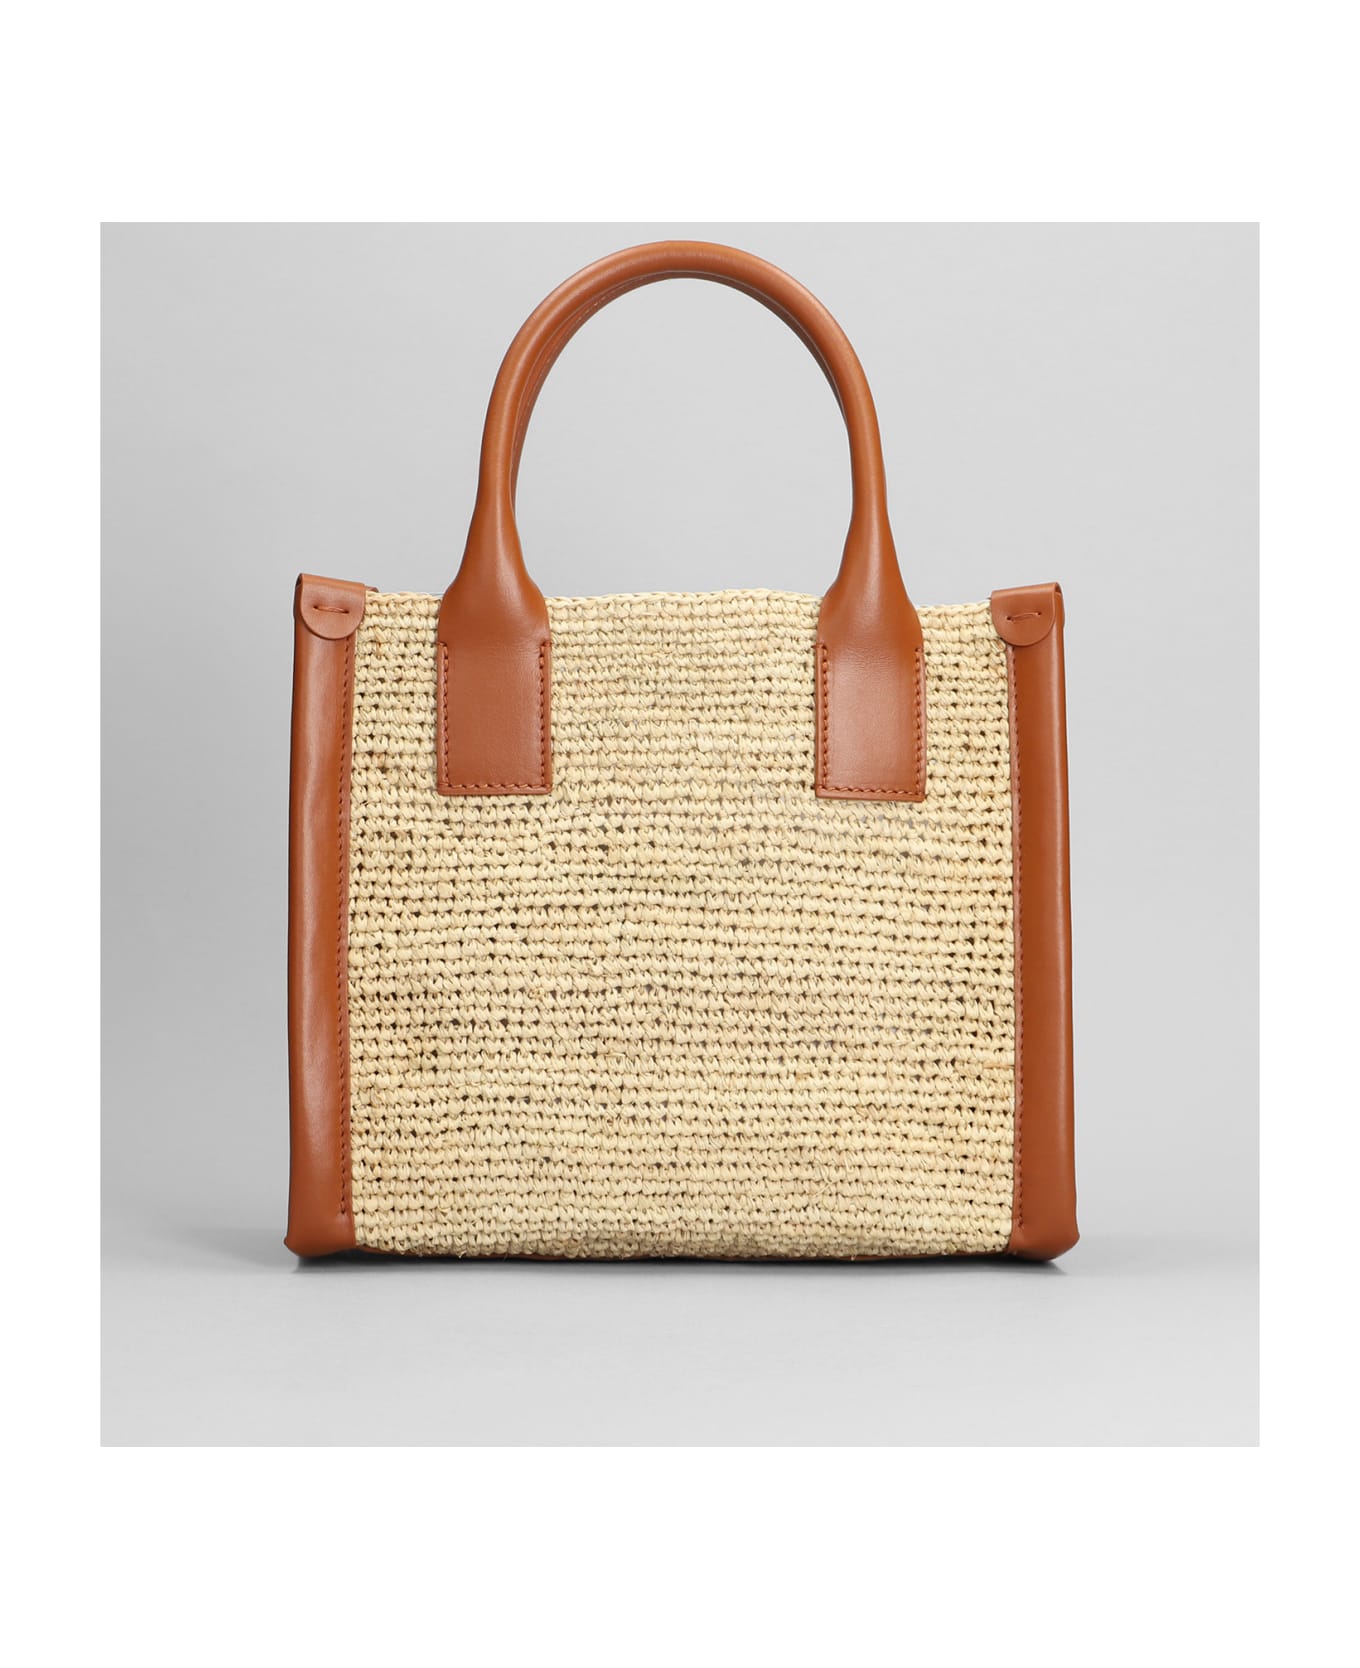 Christian Louboutin By My Side Mini Tote Handbag - Natural/cuoio